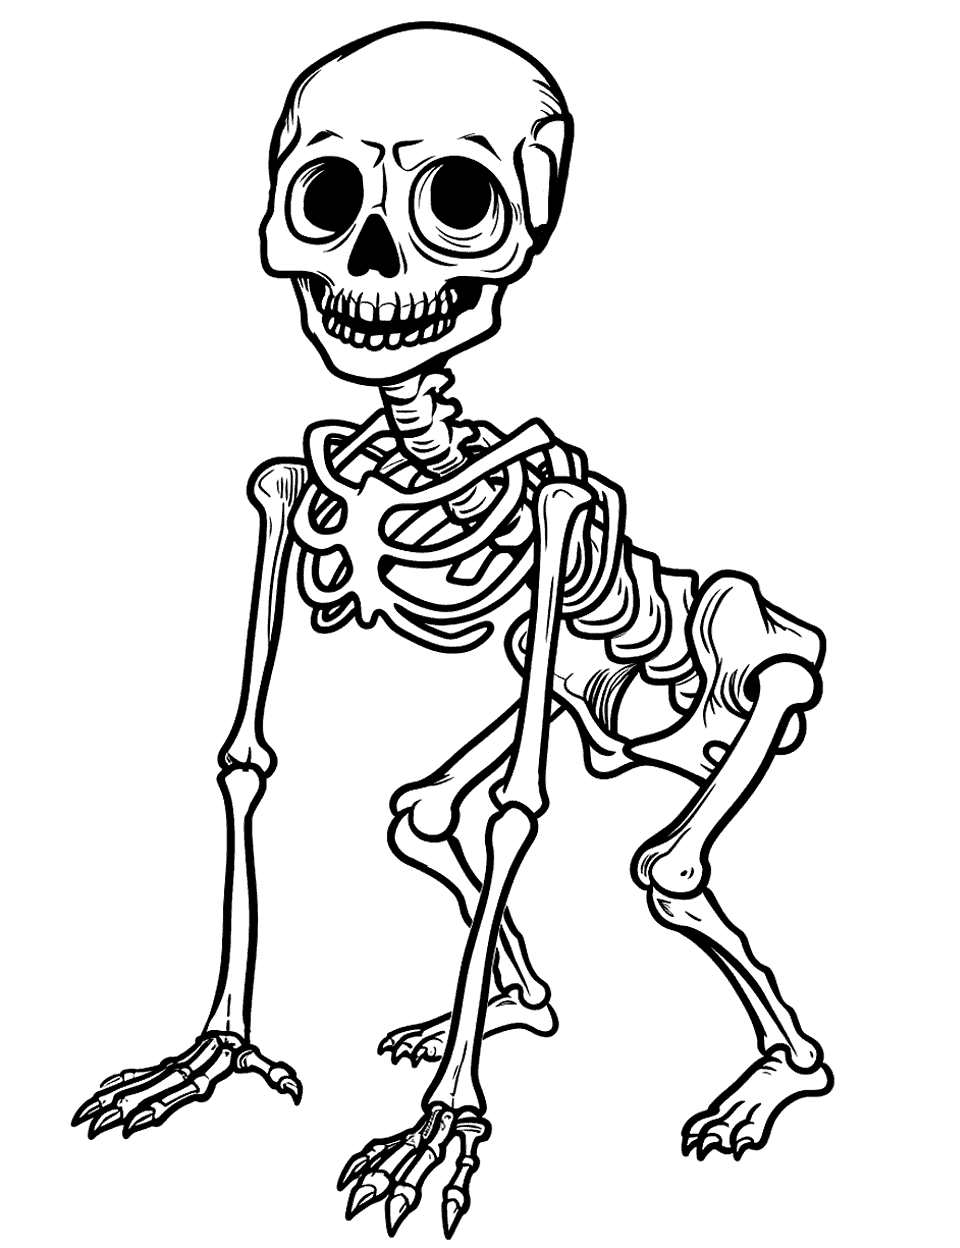 Happy Dog Skeleton Coloring Page - A happy skeleton bending its knees to touch the ground.